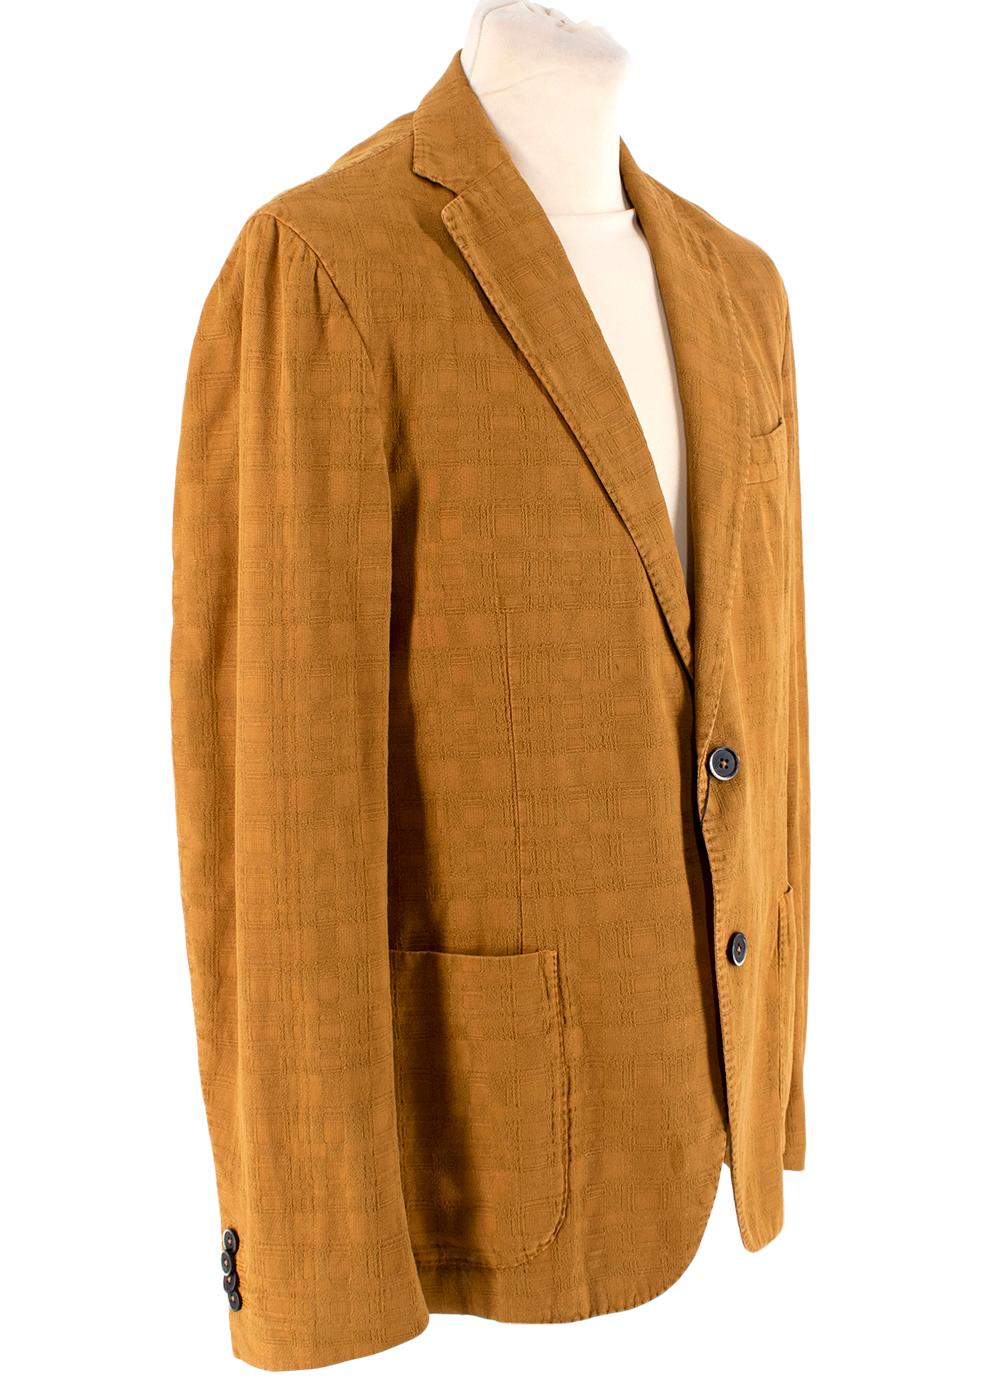 CC Collection Corneliani Ochre Cotton Linen Textured Blazer

- Rich ochre yellow shade
- Textured cotton linen blend with tone-on-tone check running throughout
- Single-breasted, relaxed silhouette
- Unlined 
- Notch lapel, 1 breast pocket, 2 flap